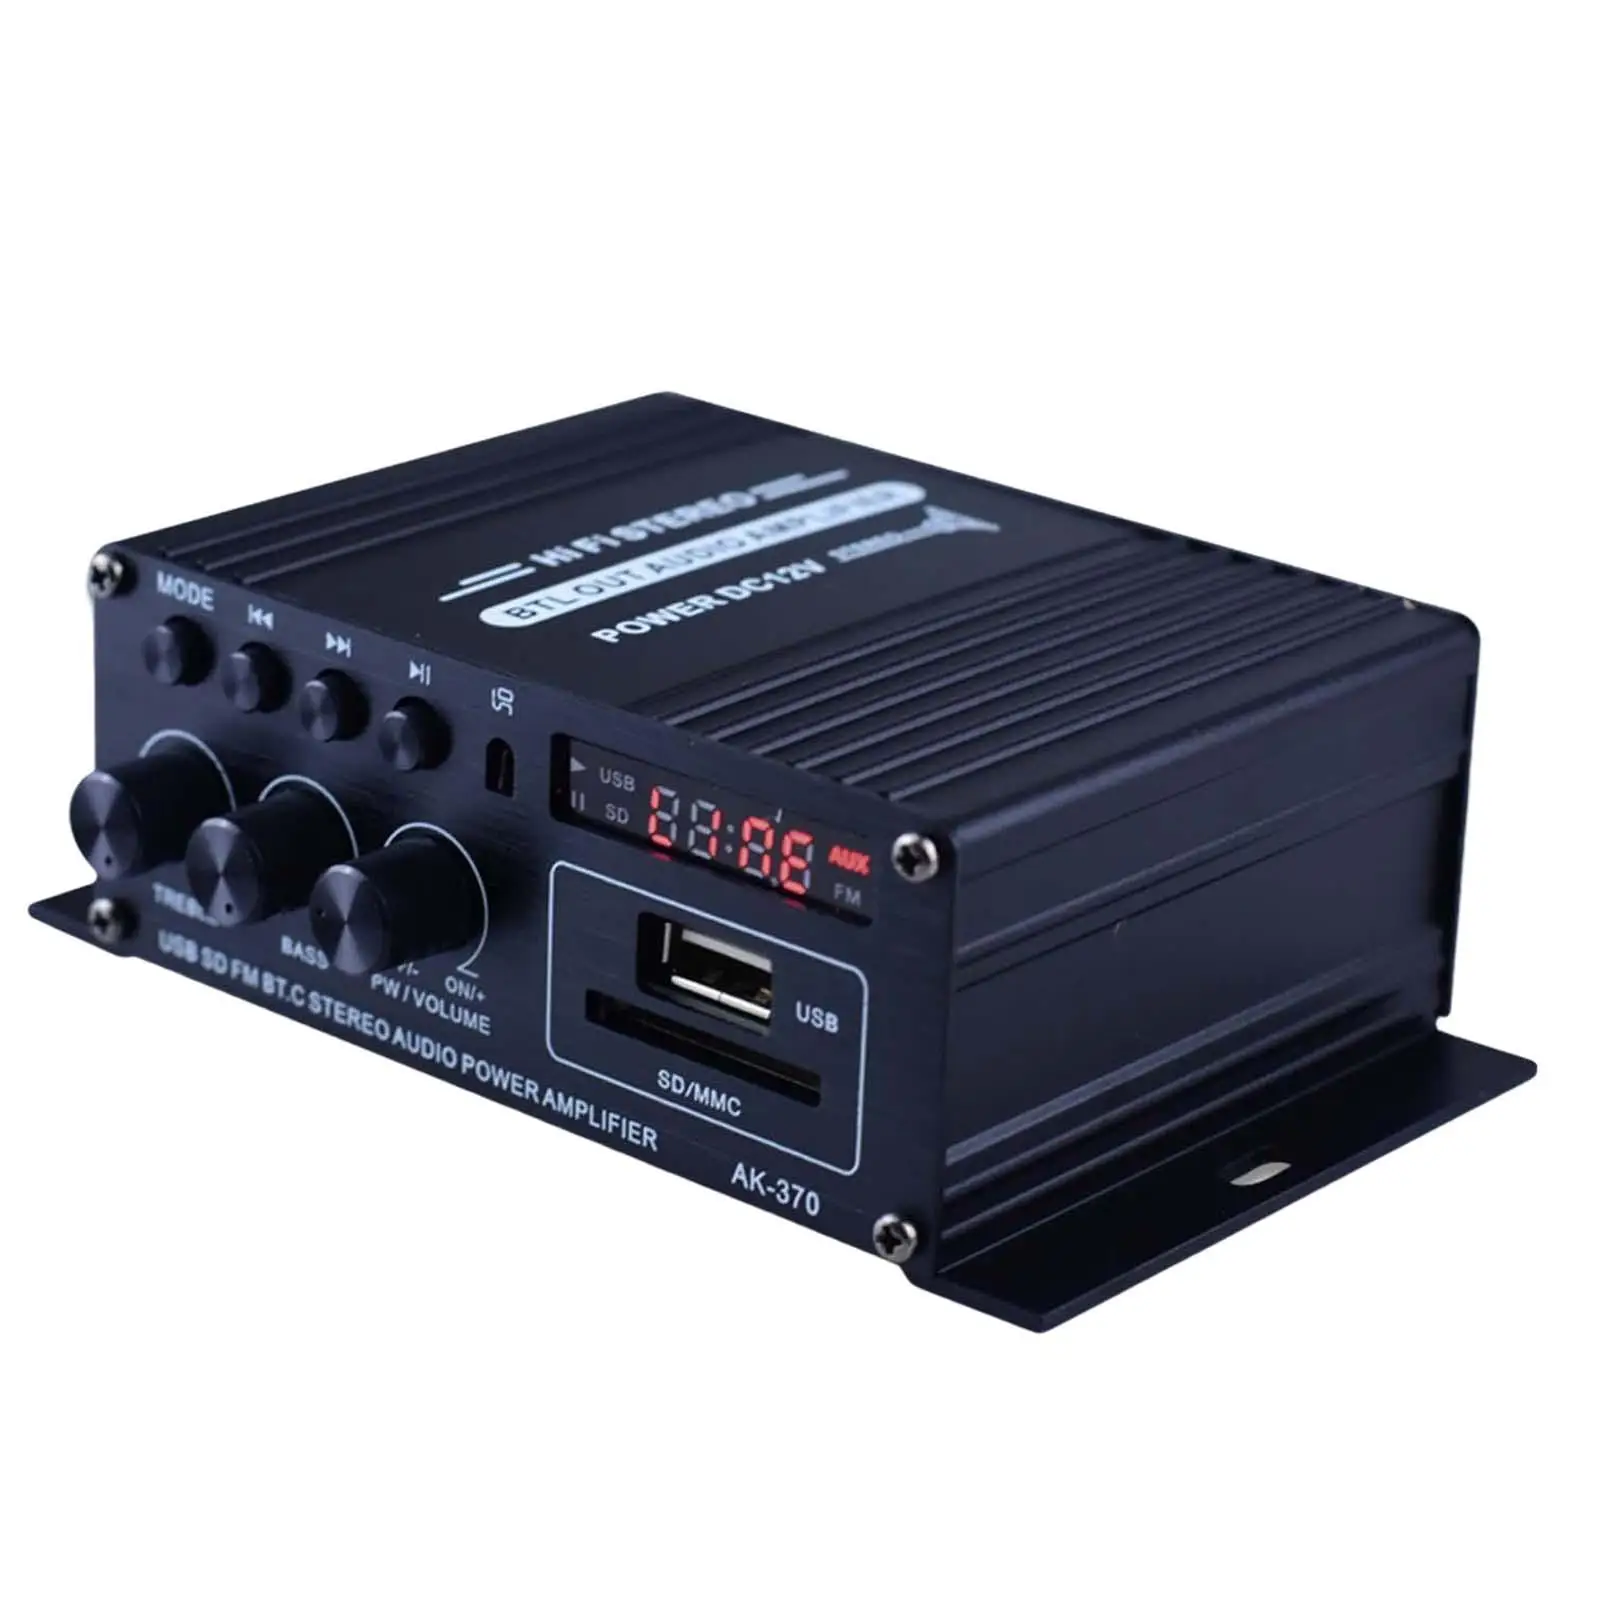 Audio Power Amplifier for Car Home Bar Party 12V-24V 20W+20W 2.0 Channel Bluetooth Power Amplifier HiFi Stereo Amp Speaker